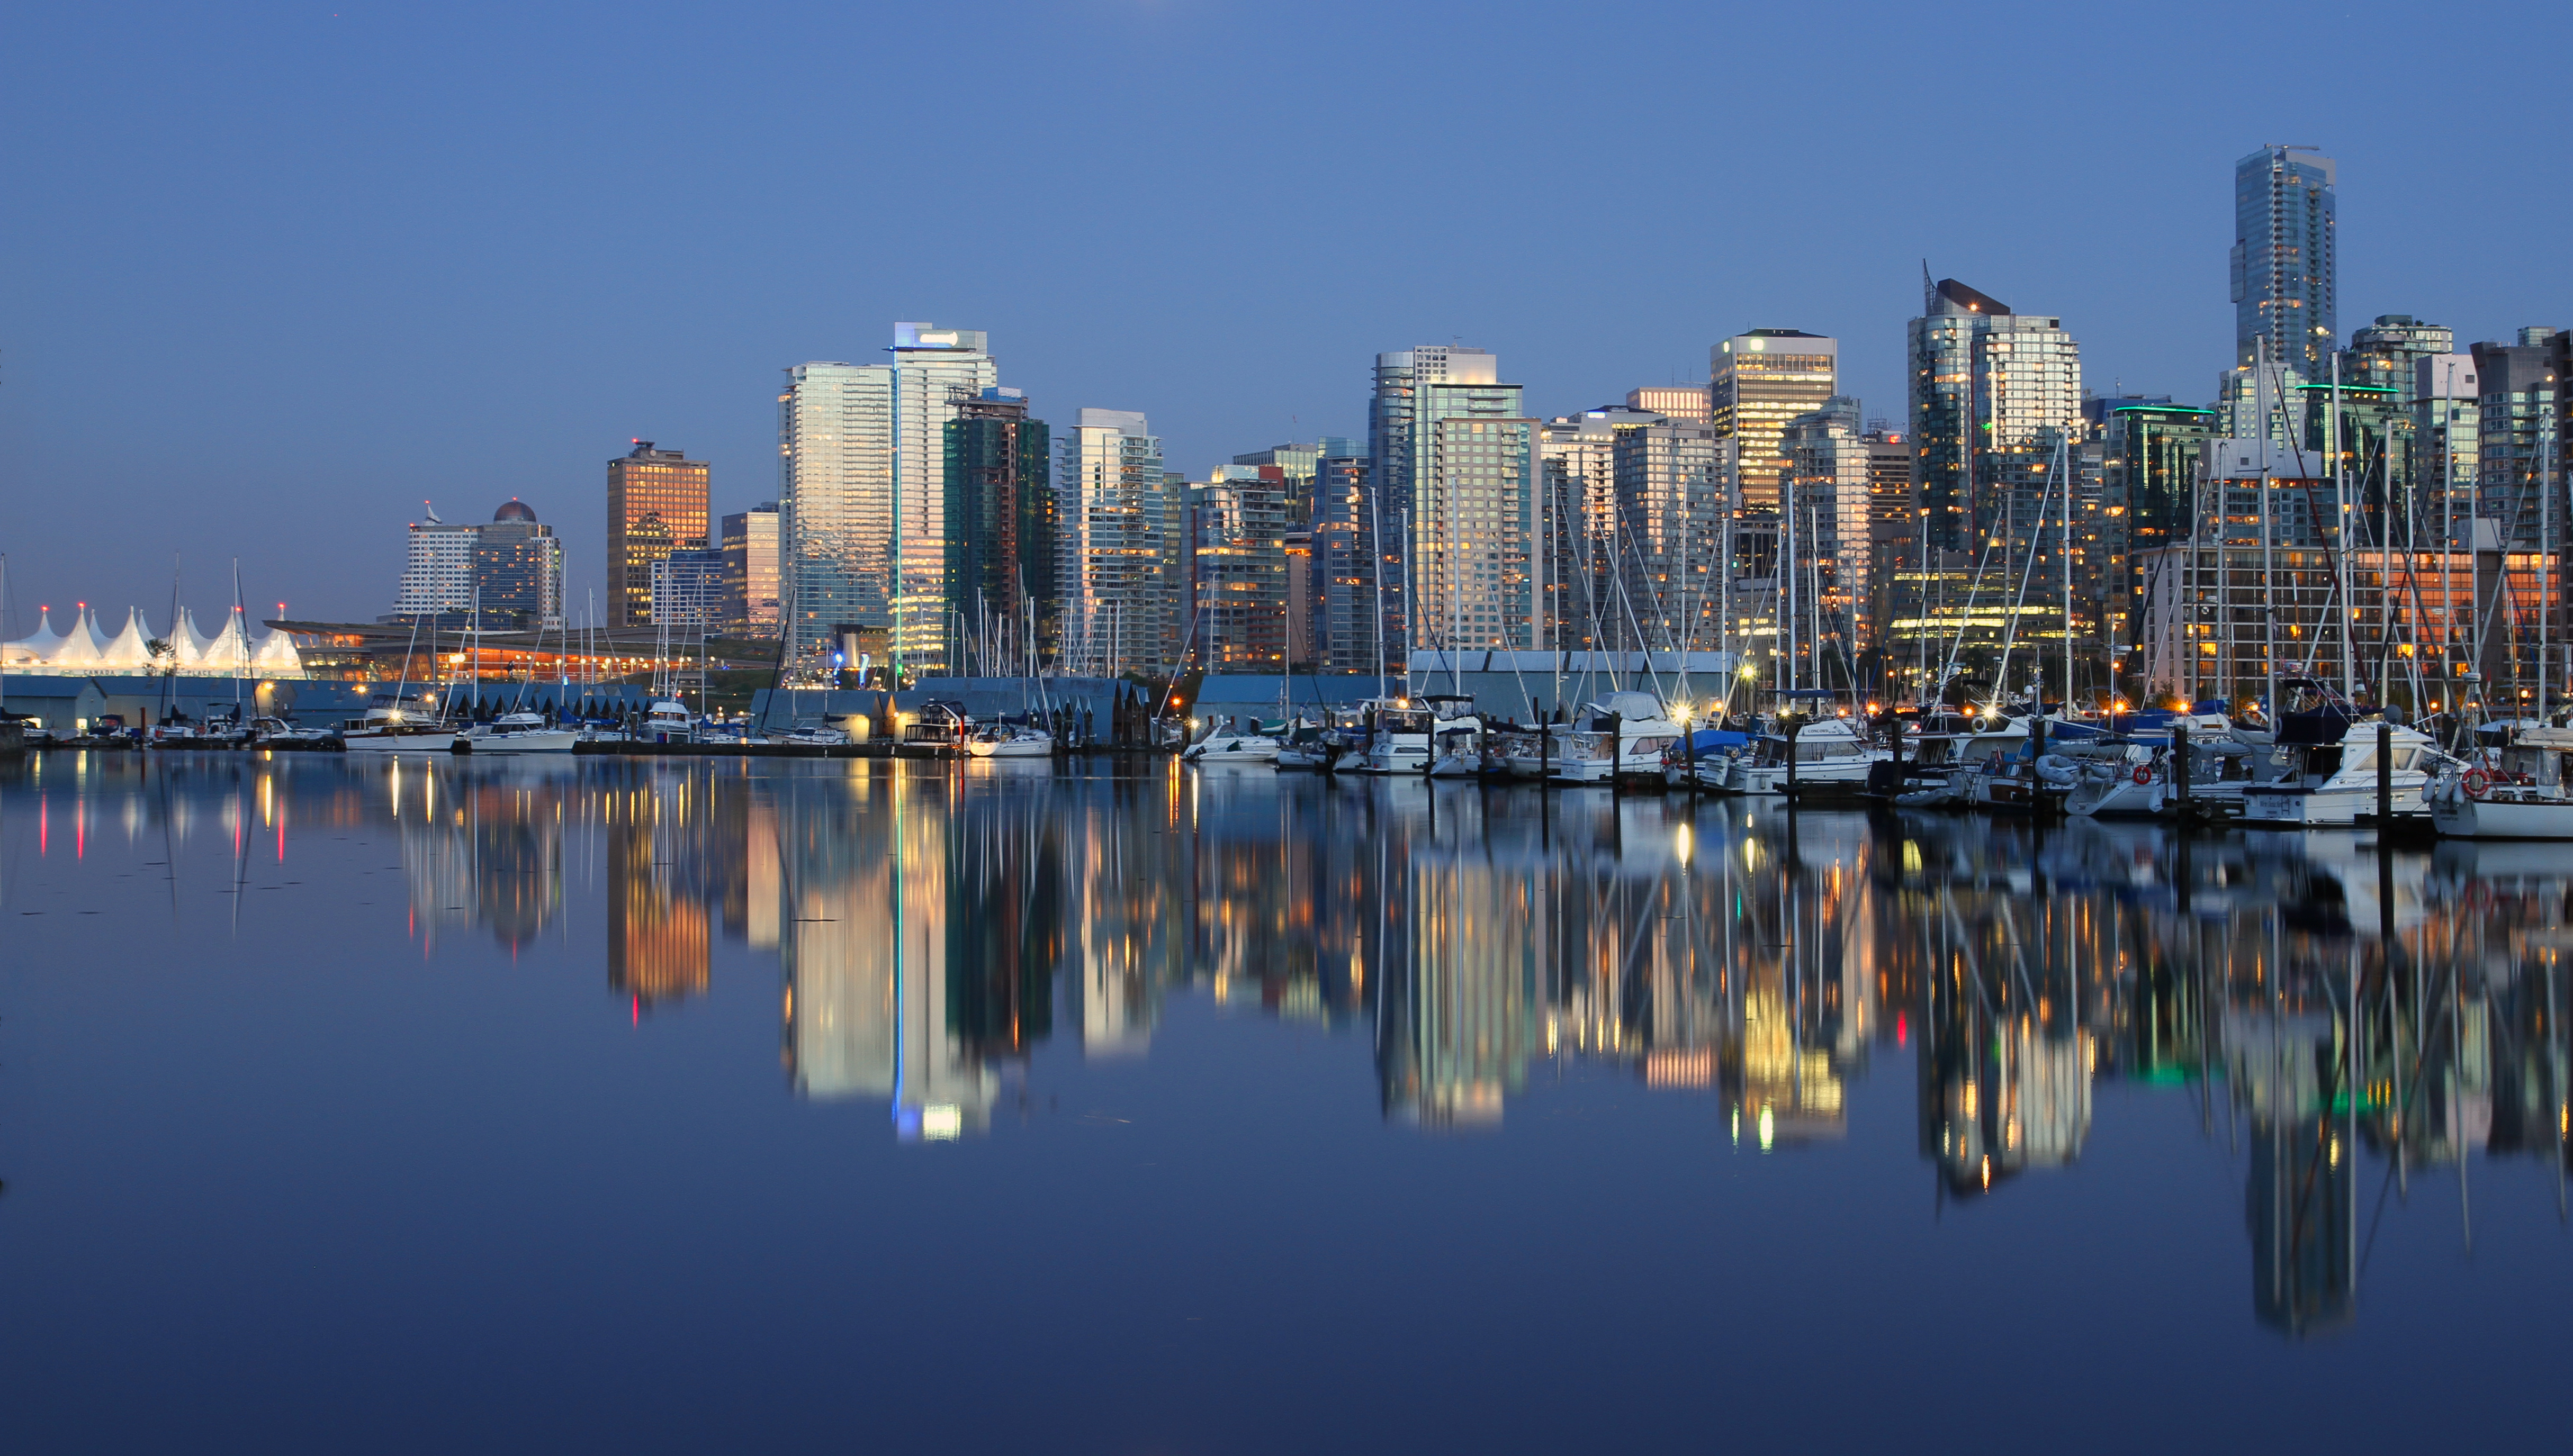 Vancouver BC Evening Waterfront - Picture of the Day #17